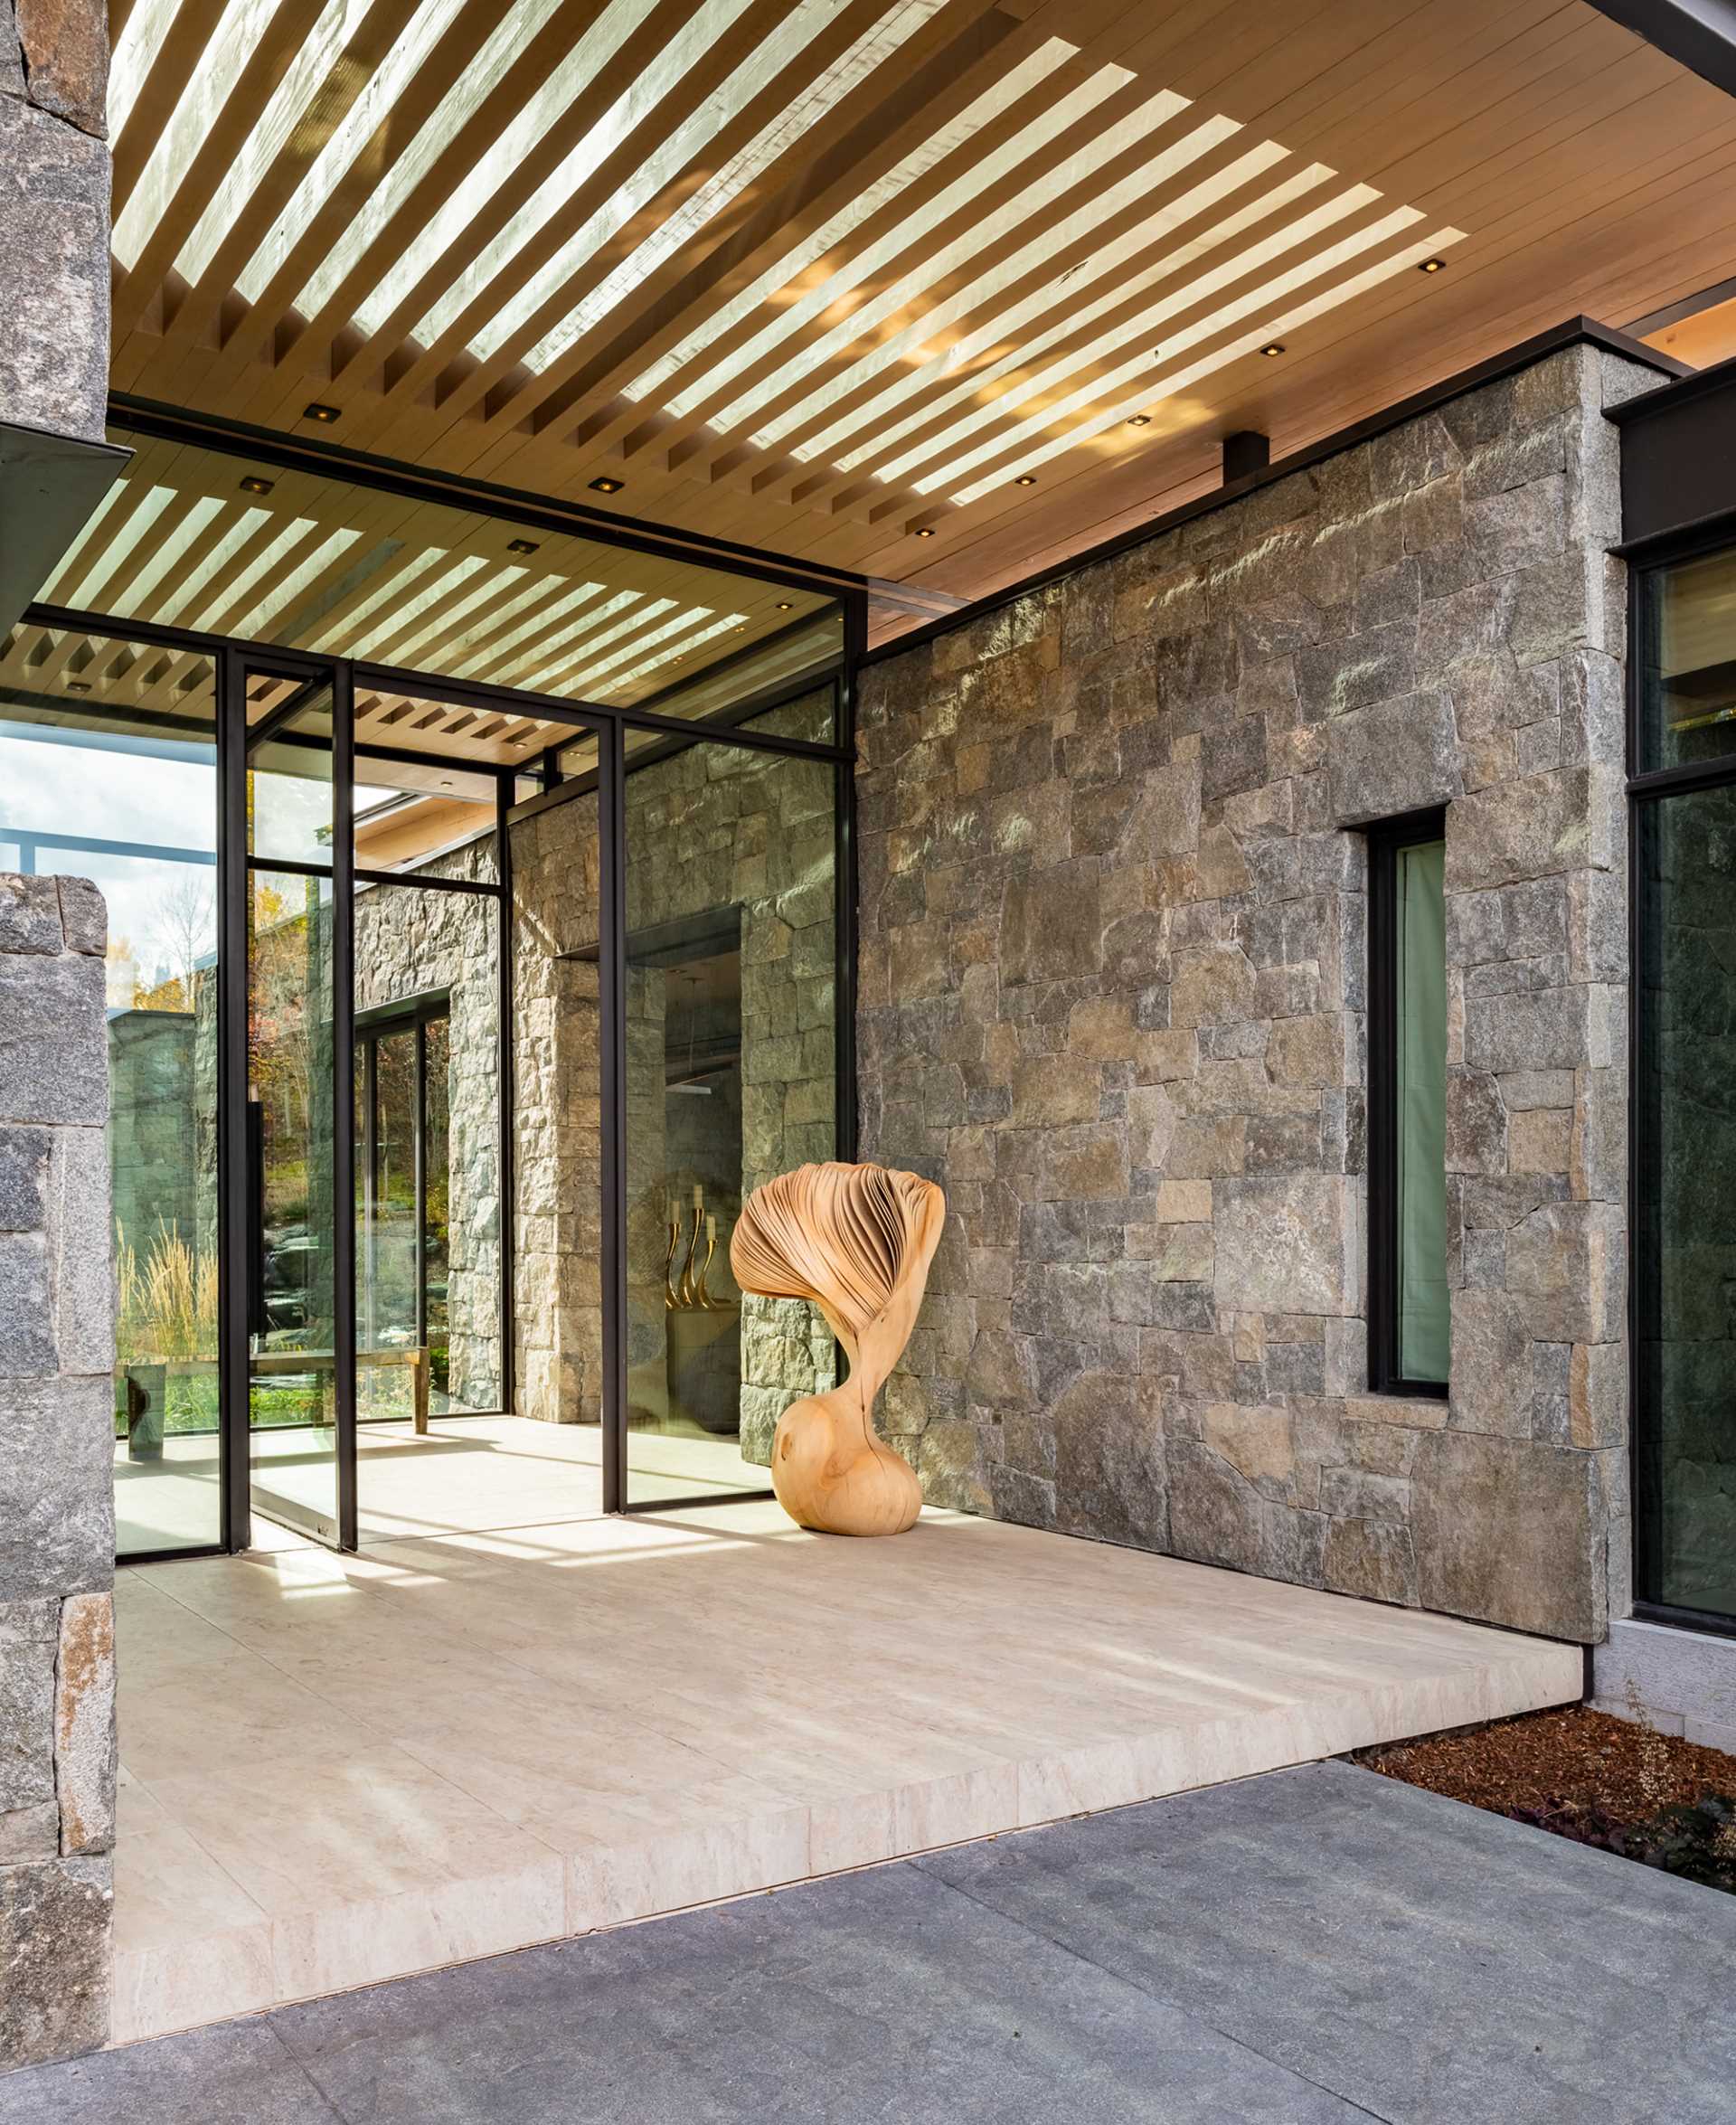 The entryway of this contemporary mountain home showcases stone, wood, steel, and glass.